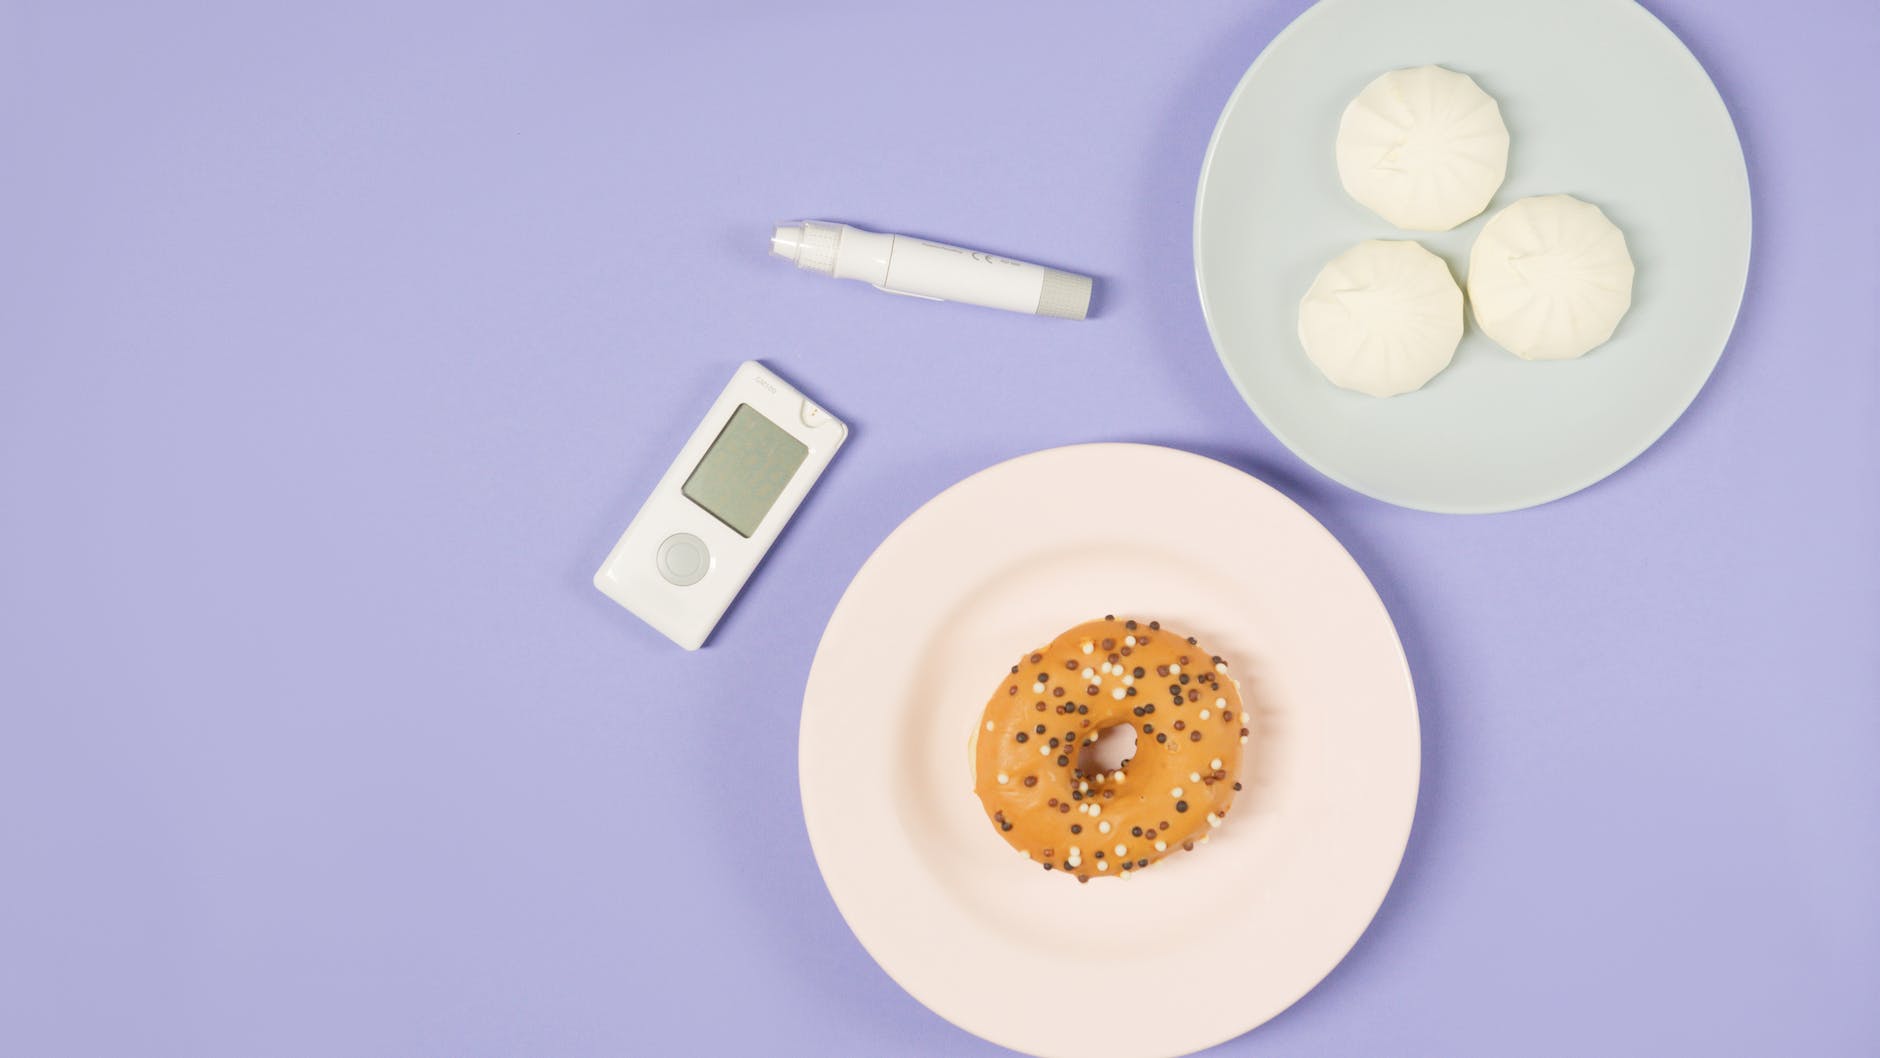 glucometer and insulin pen beside plates of donut and steamed buns